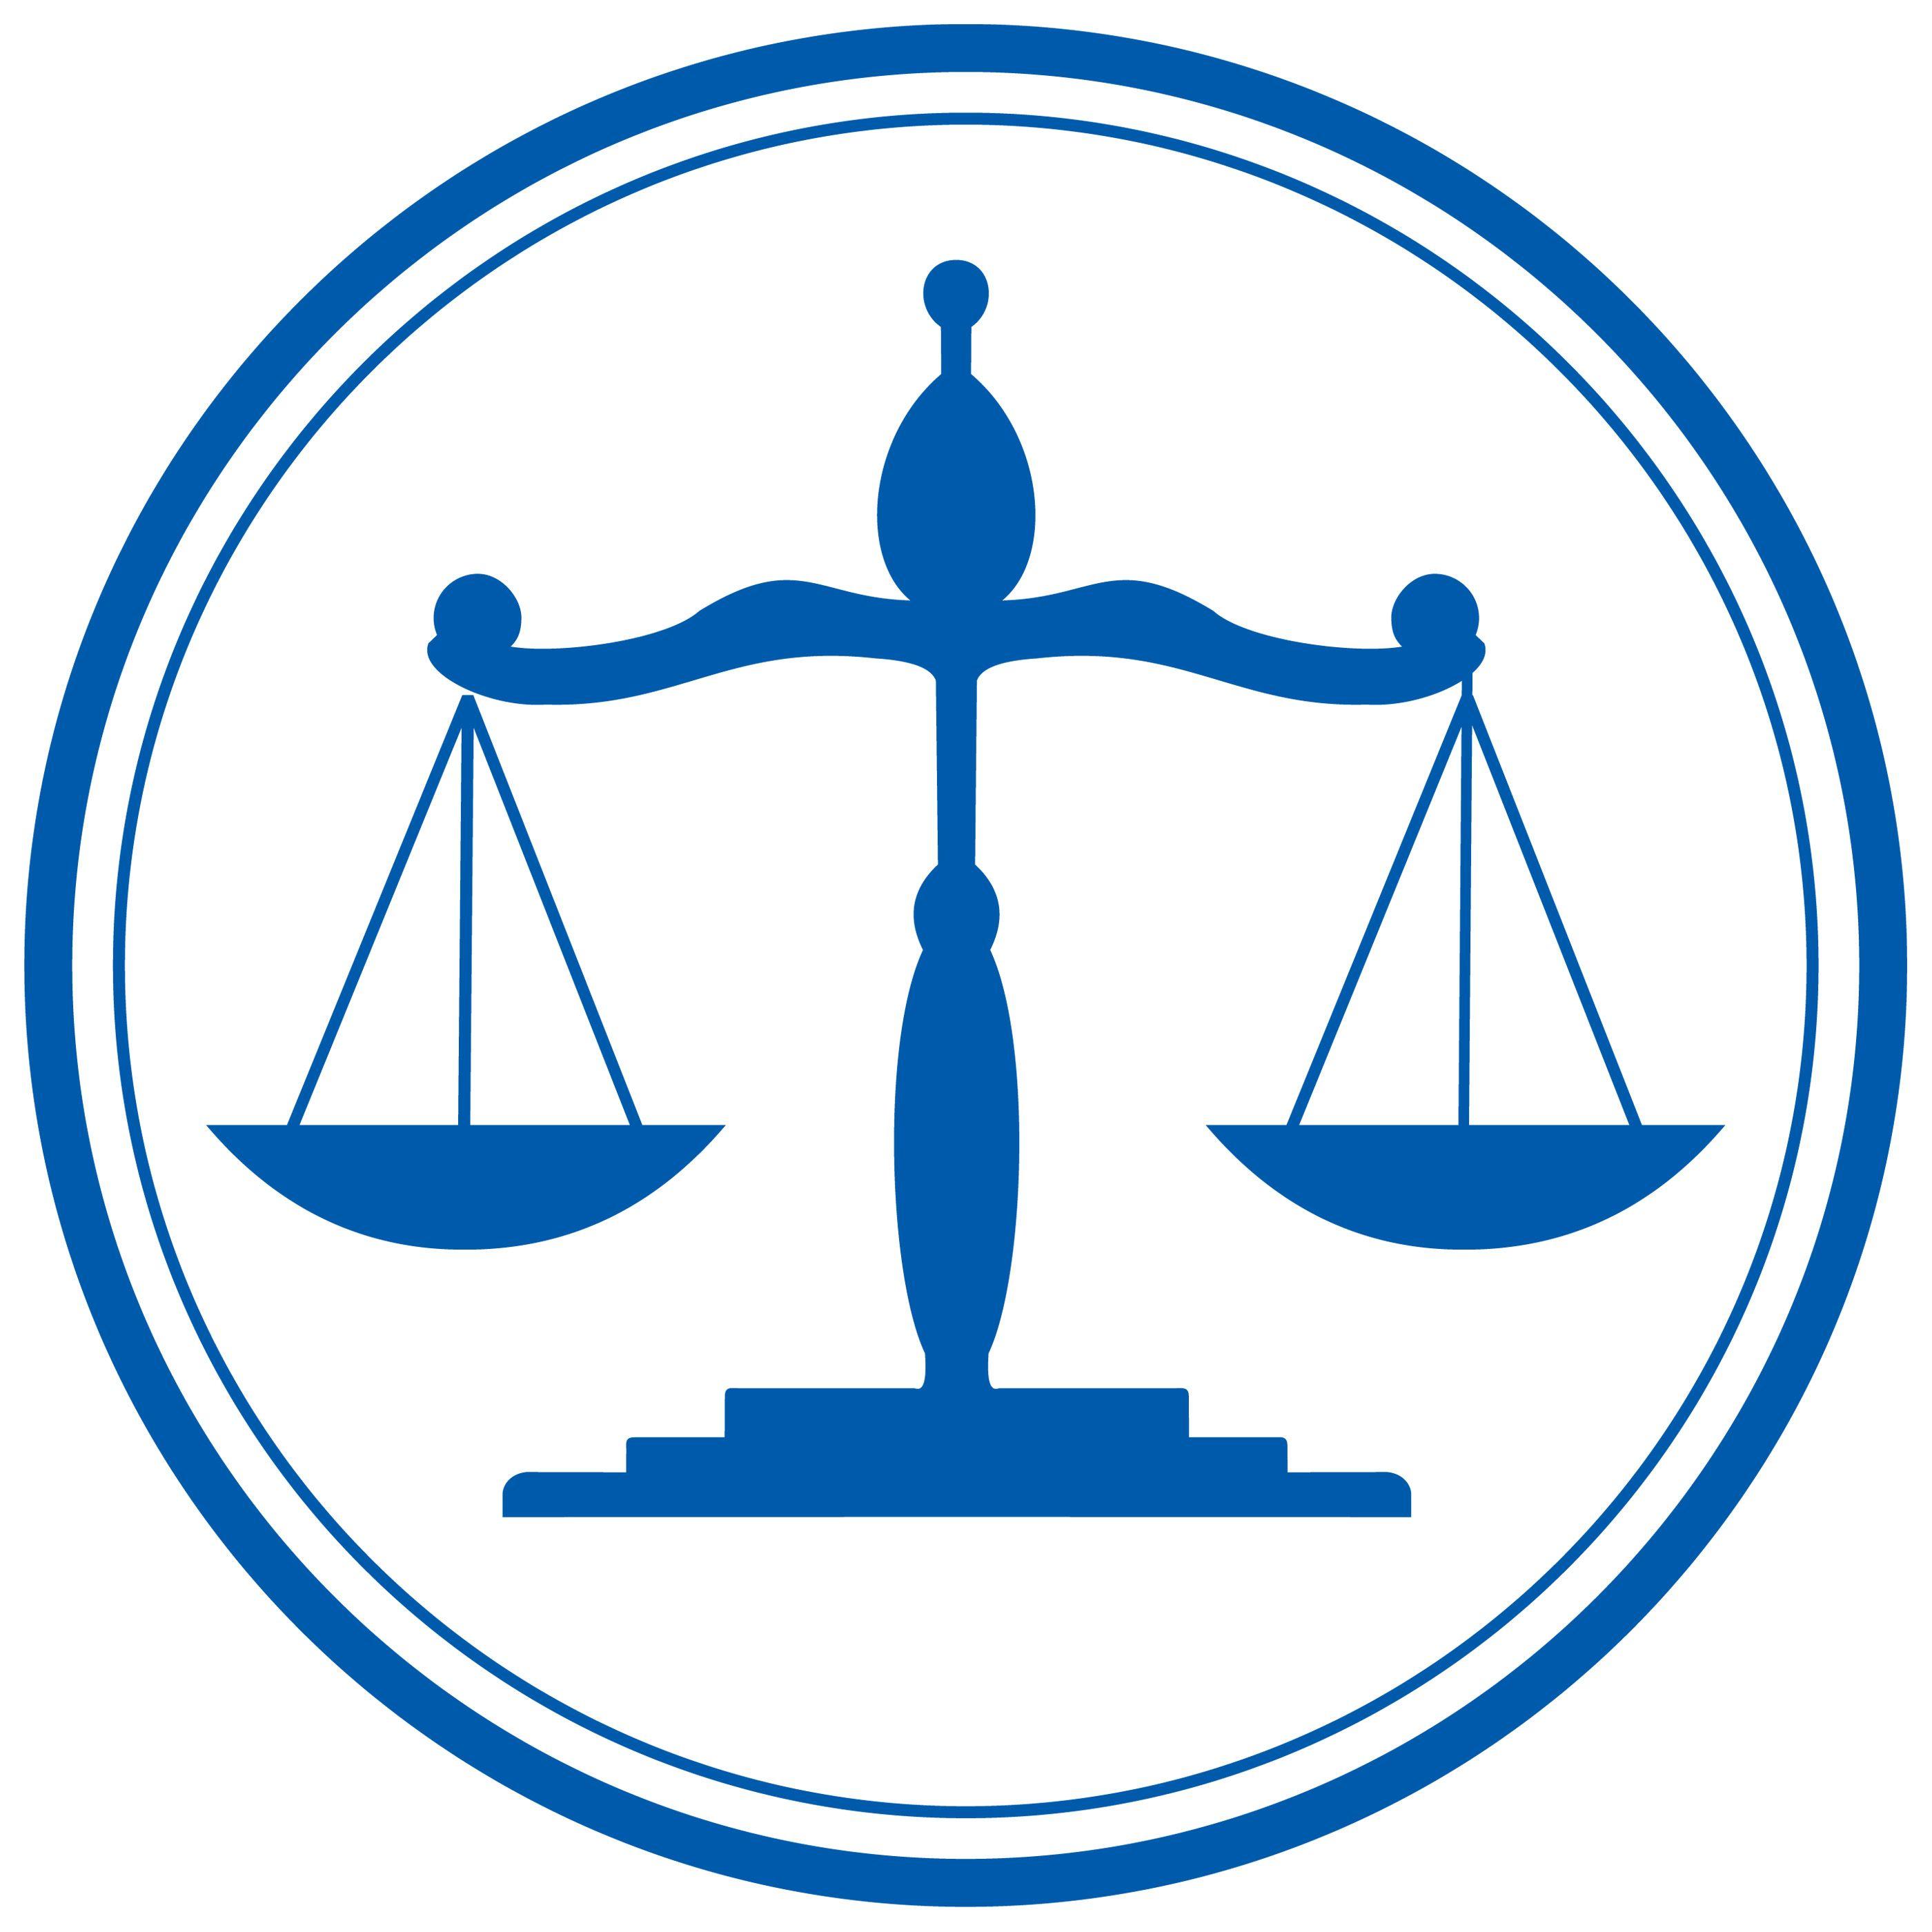 Court of Law Logo - Family Court is Open to the Public